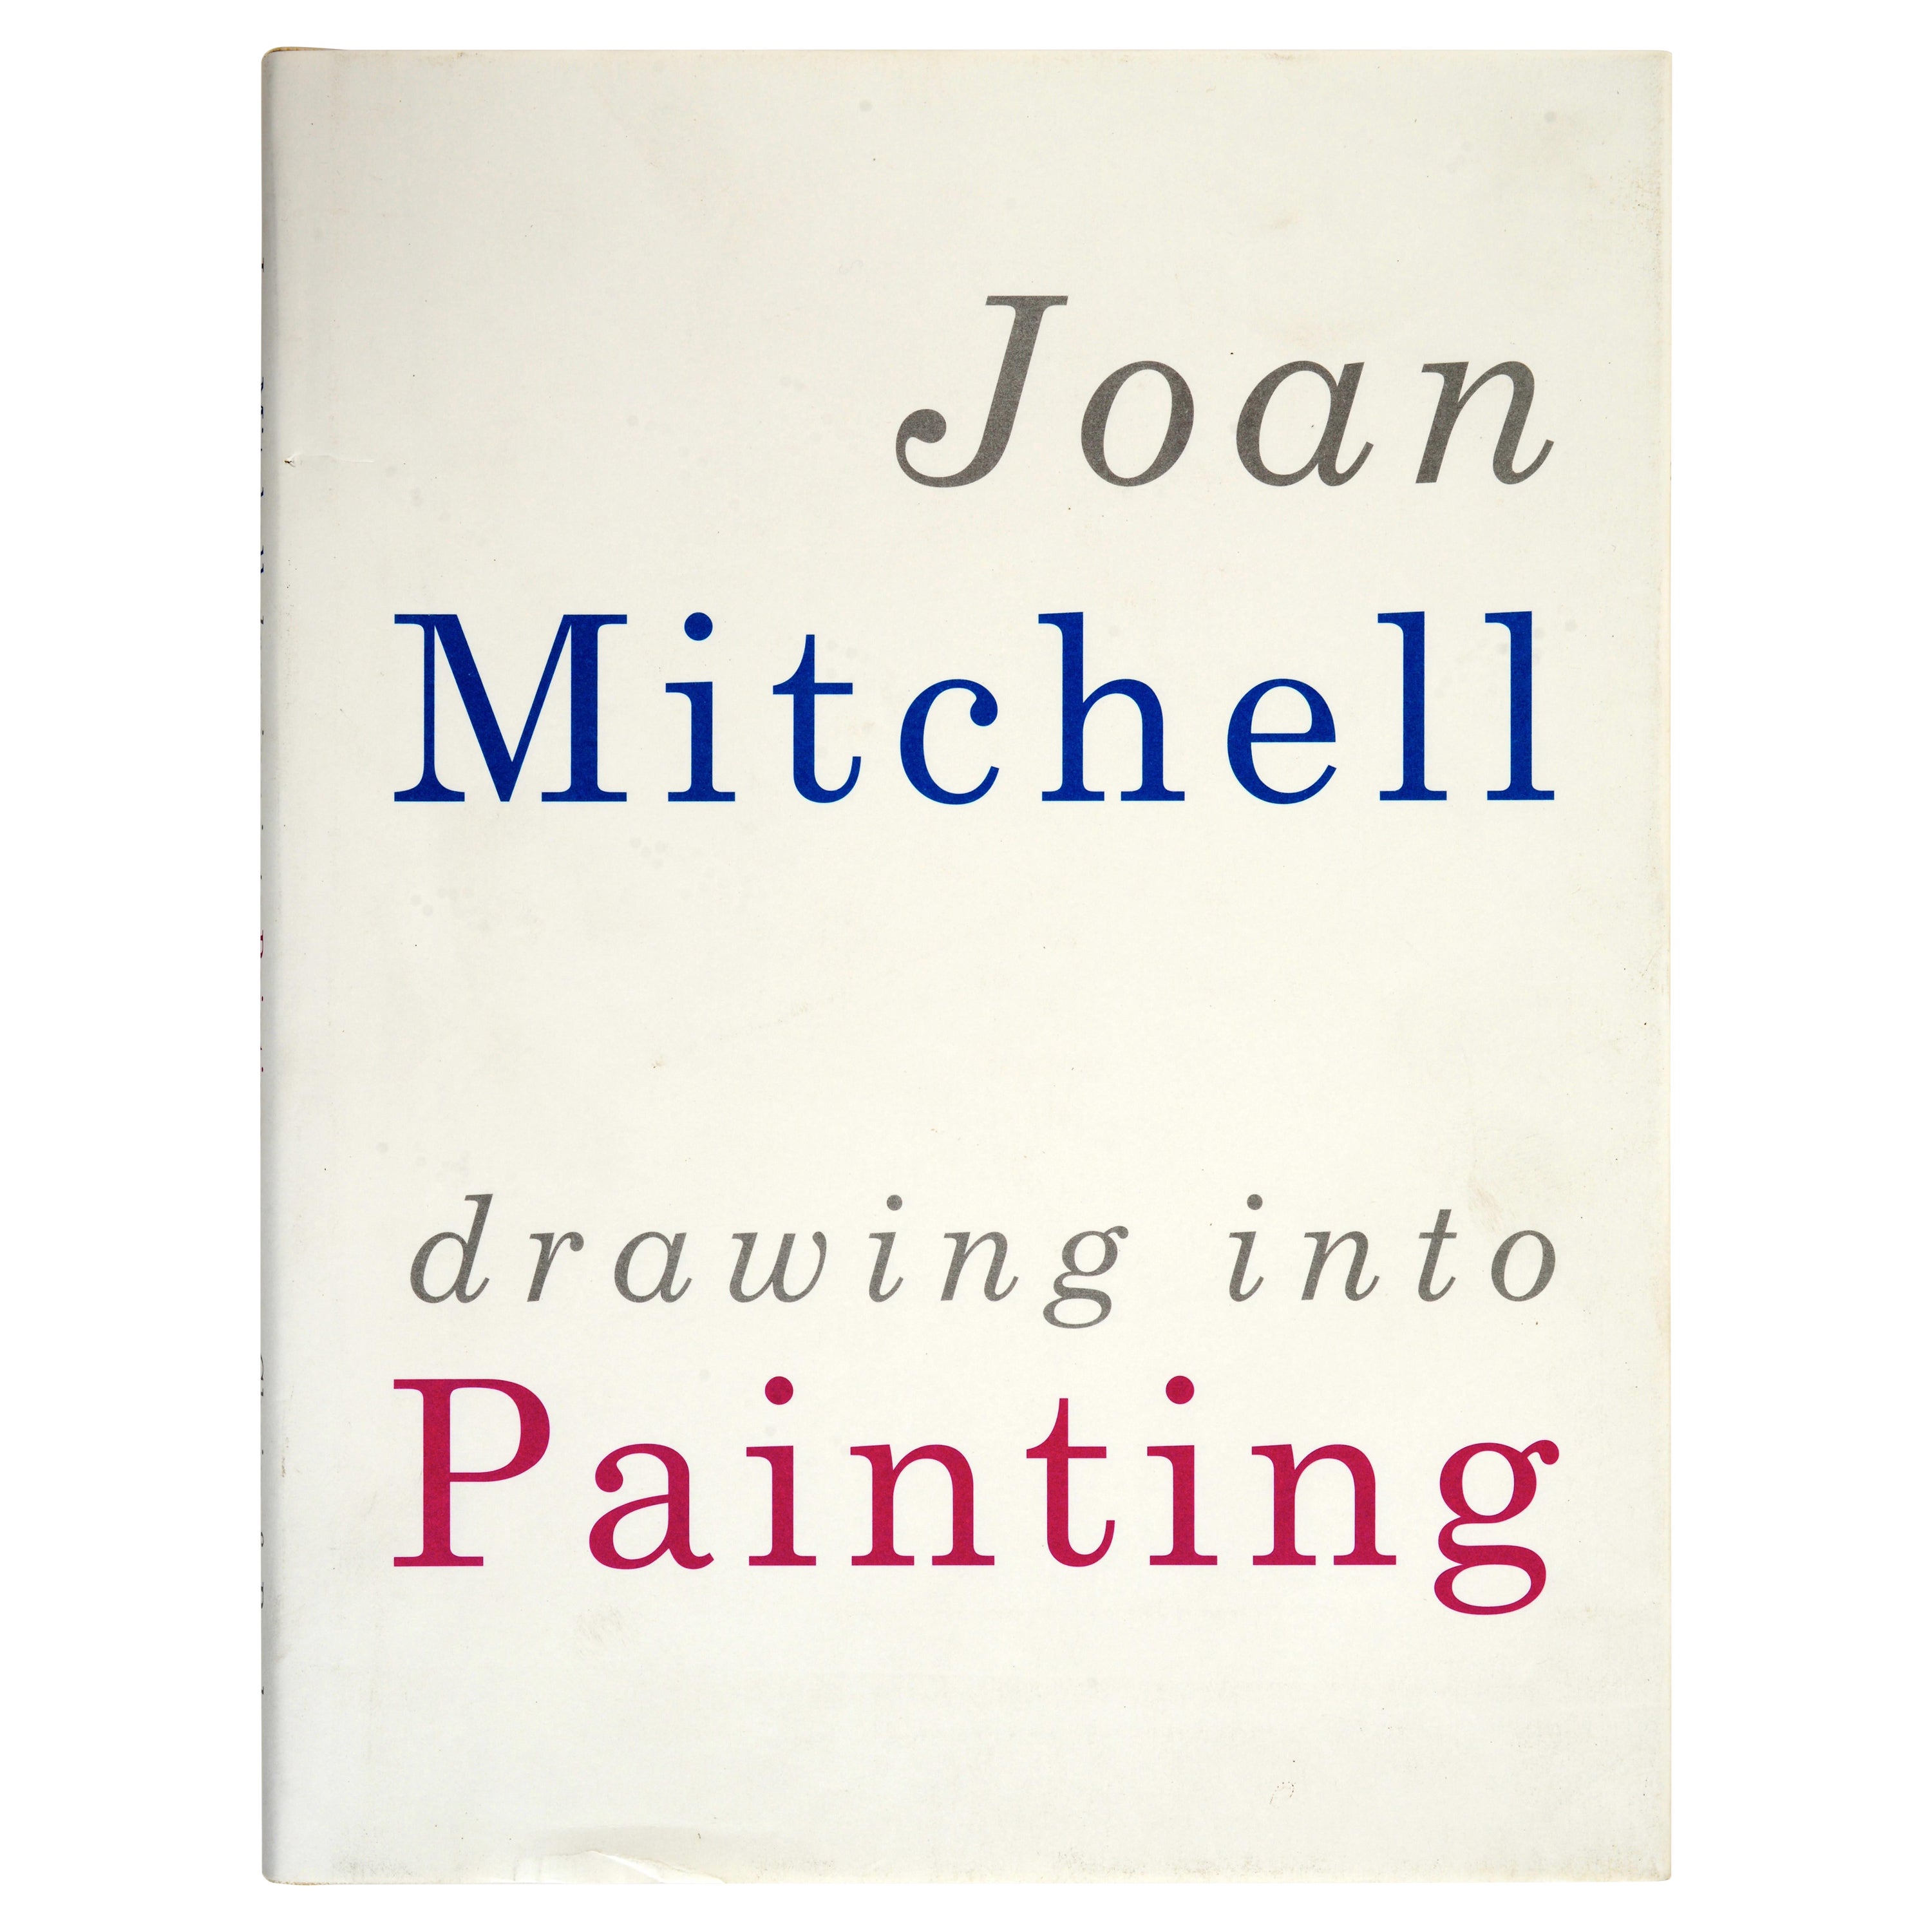 Joan Mitchell-Drawing into Painting by Mark Rosenthal, 1st Ed Exhibition Cat For Sale